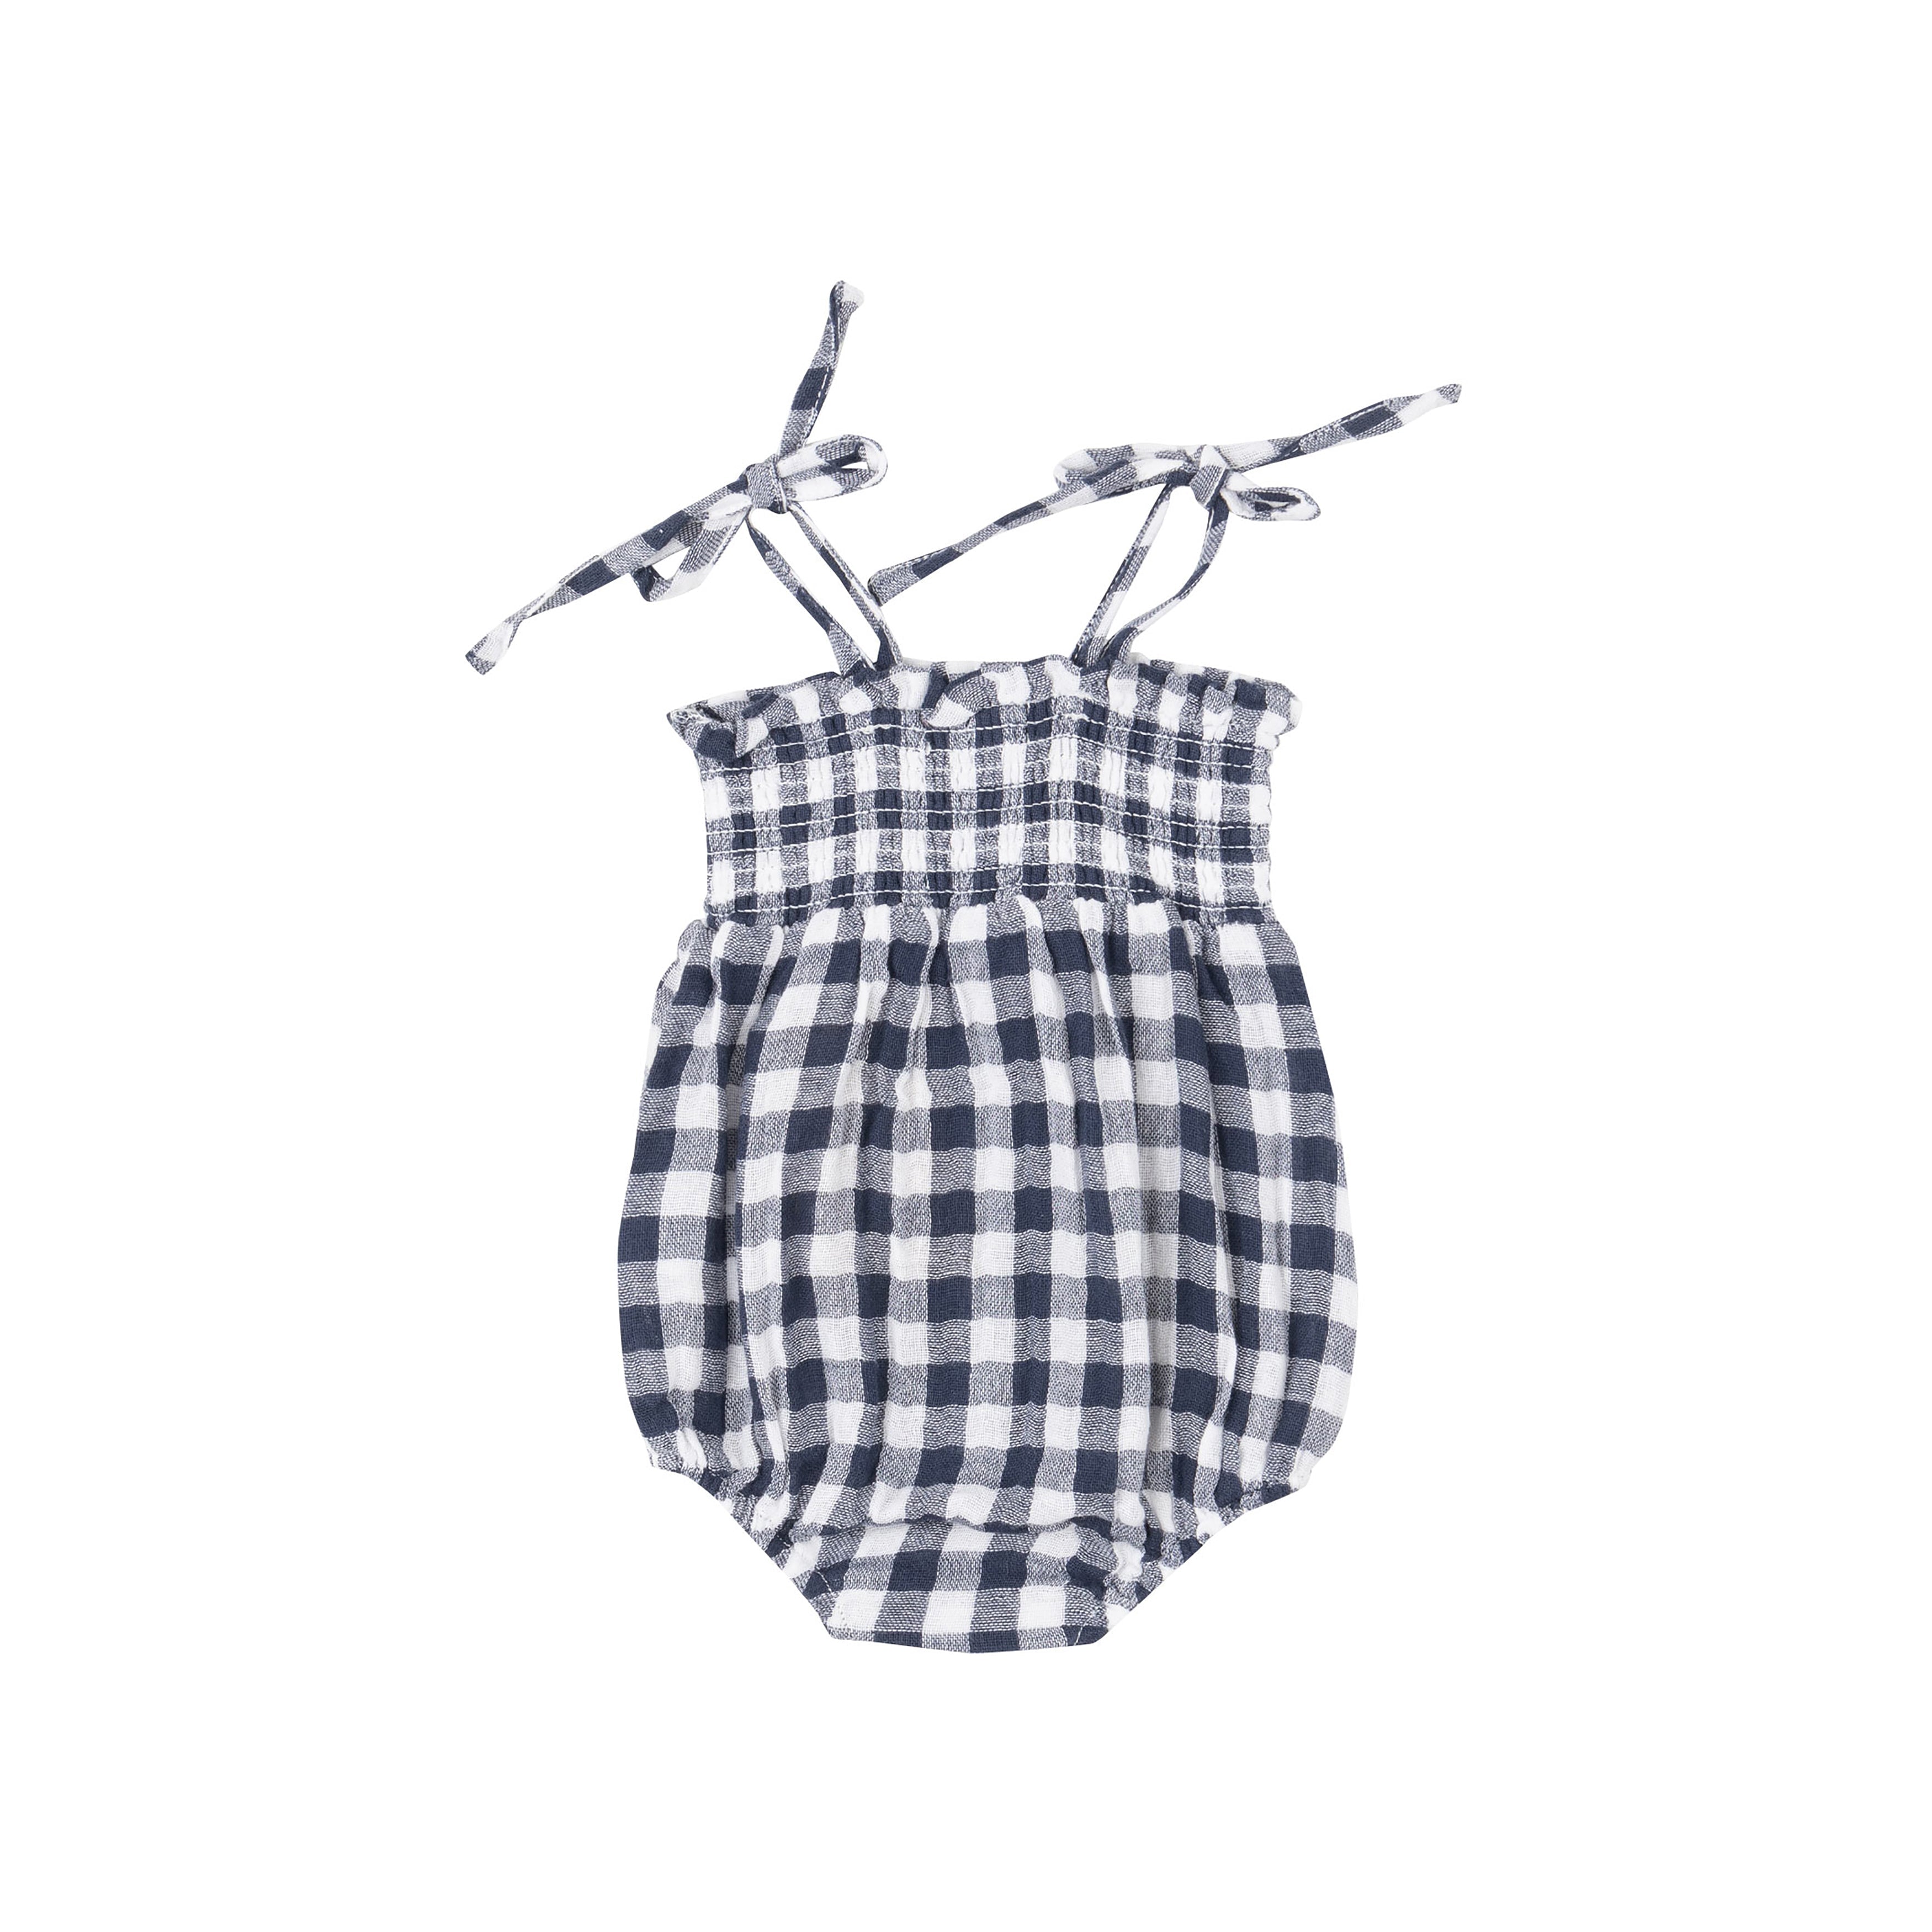 Tie Strap Smocked Bubble - Gingham Navy